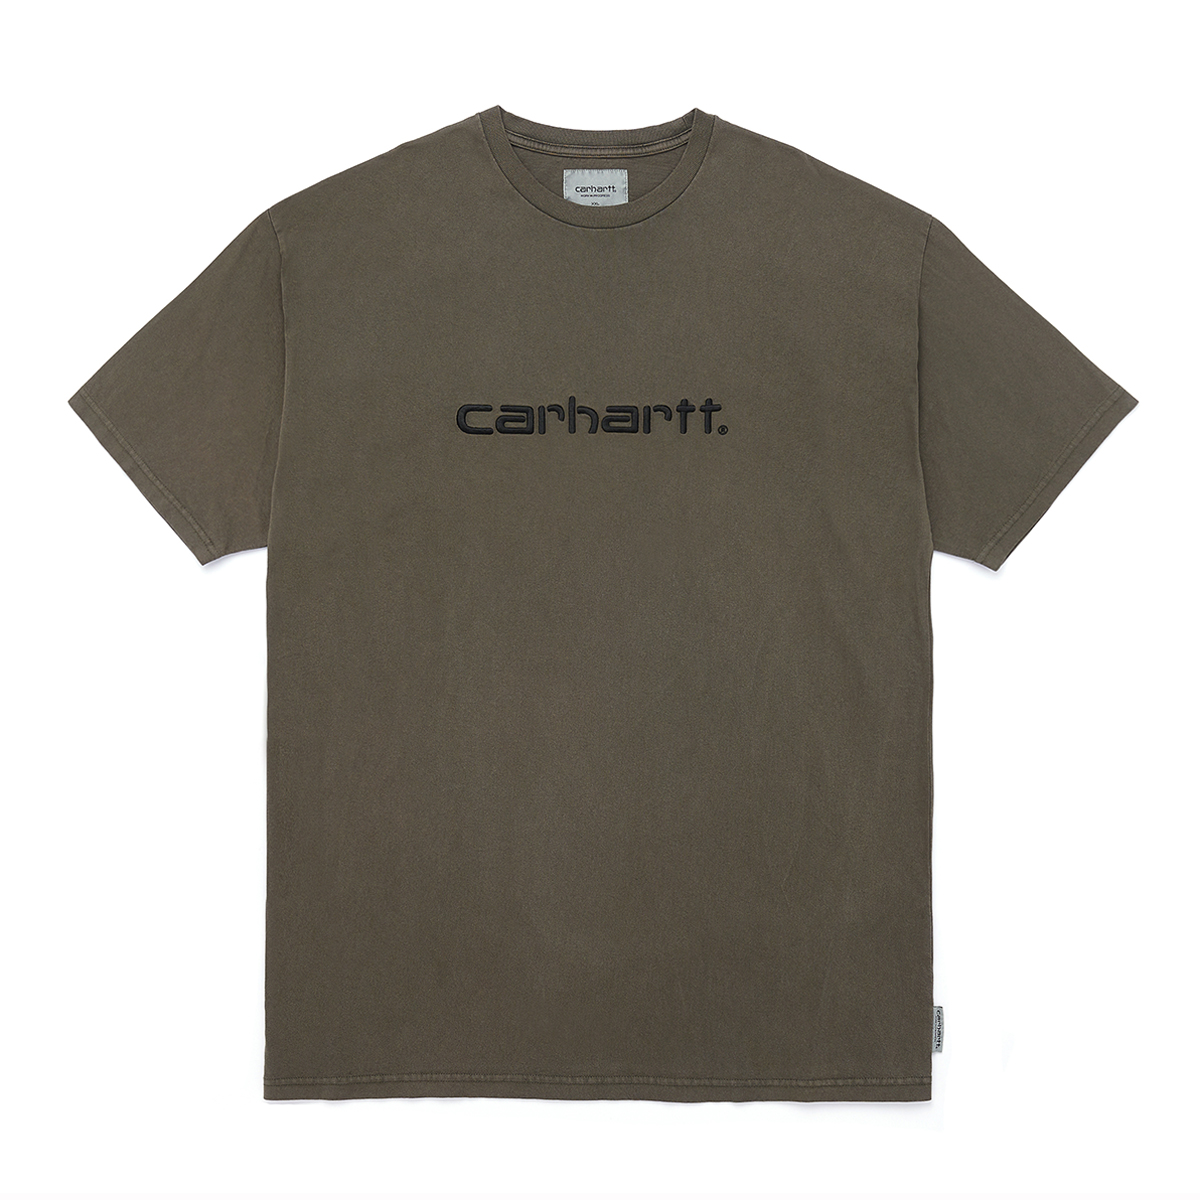 S/S Carhartt Embroidery T-shirt (PD)